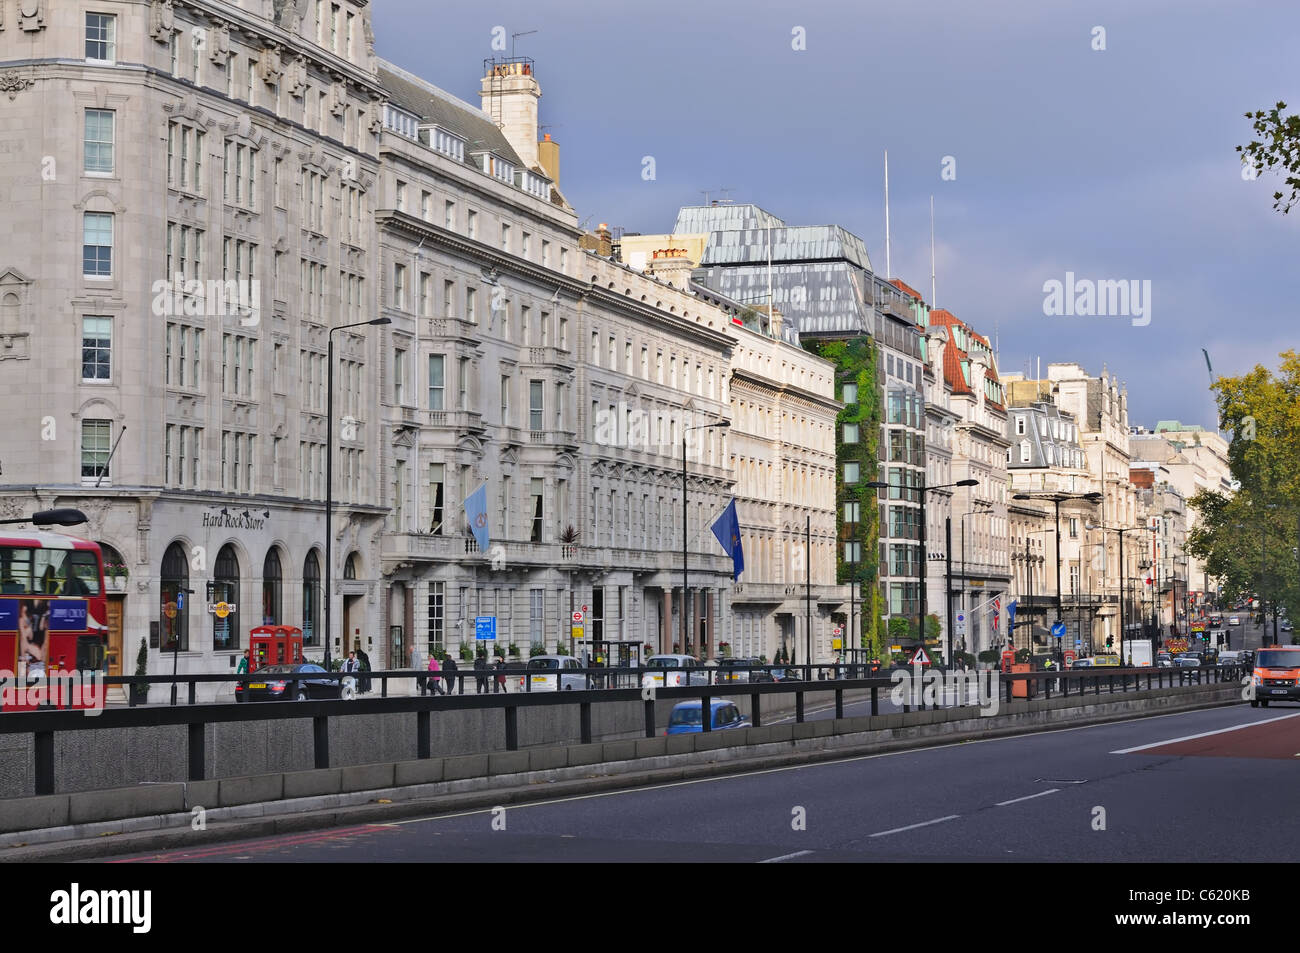 Piccadilly - One of the most famous streets in London Stock Photo